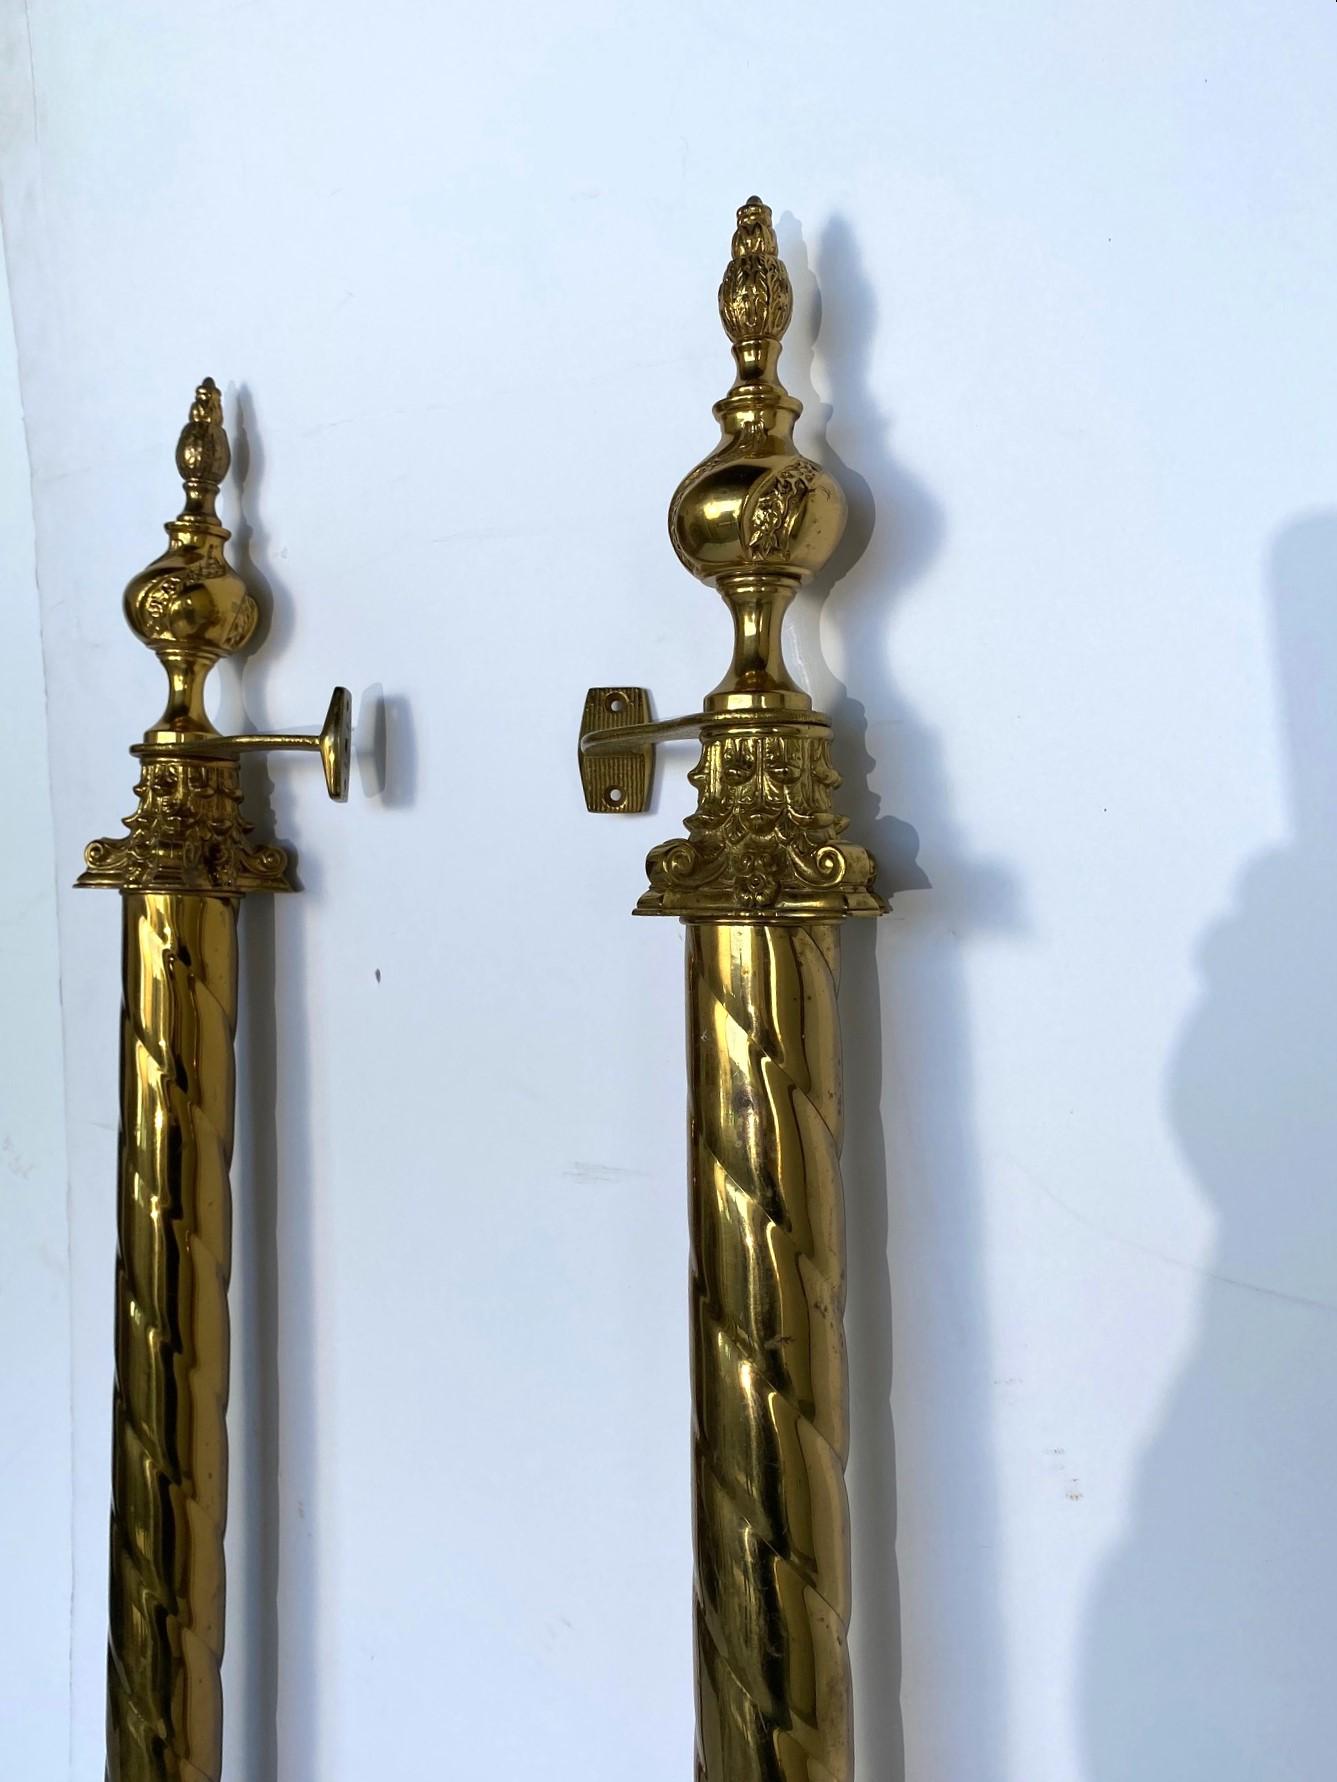 A huge pair of impressive brass door handles. Barley twist center column with Corinthian caps and finished top and bottom with decorated finials.